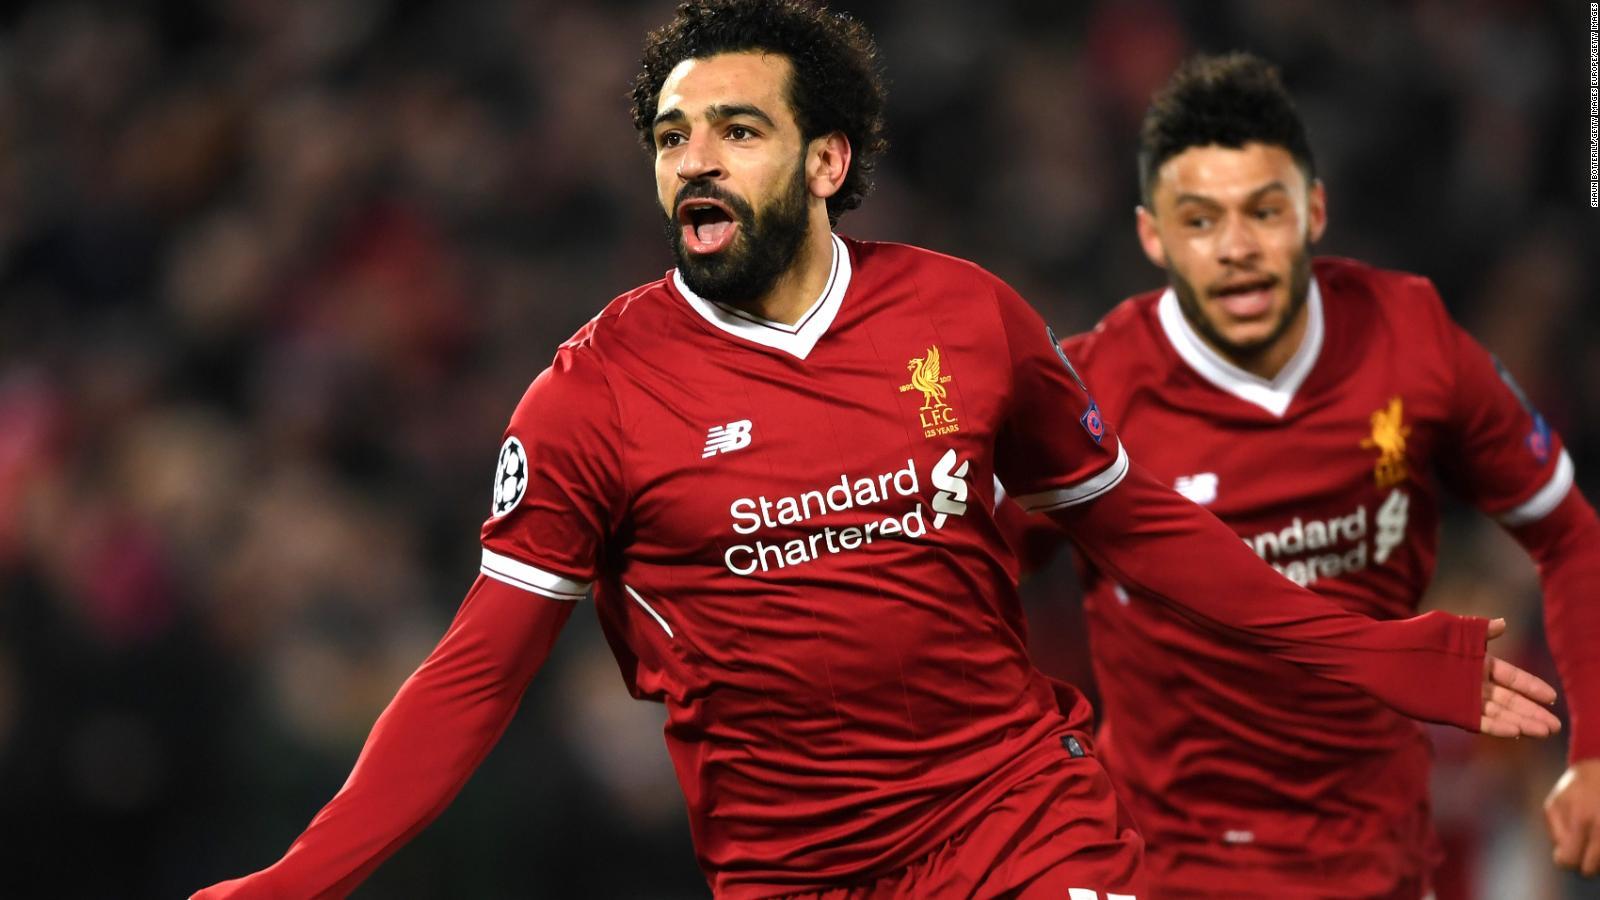 Liverpool FC or Manchester City: Which team is most likely to win